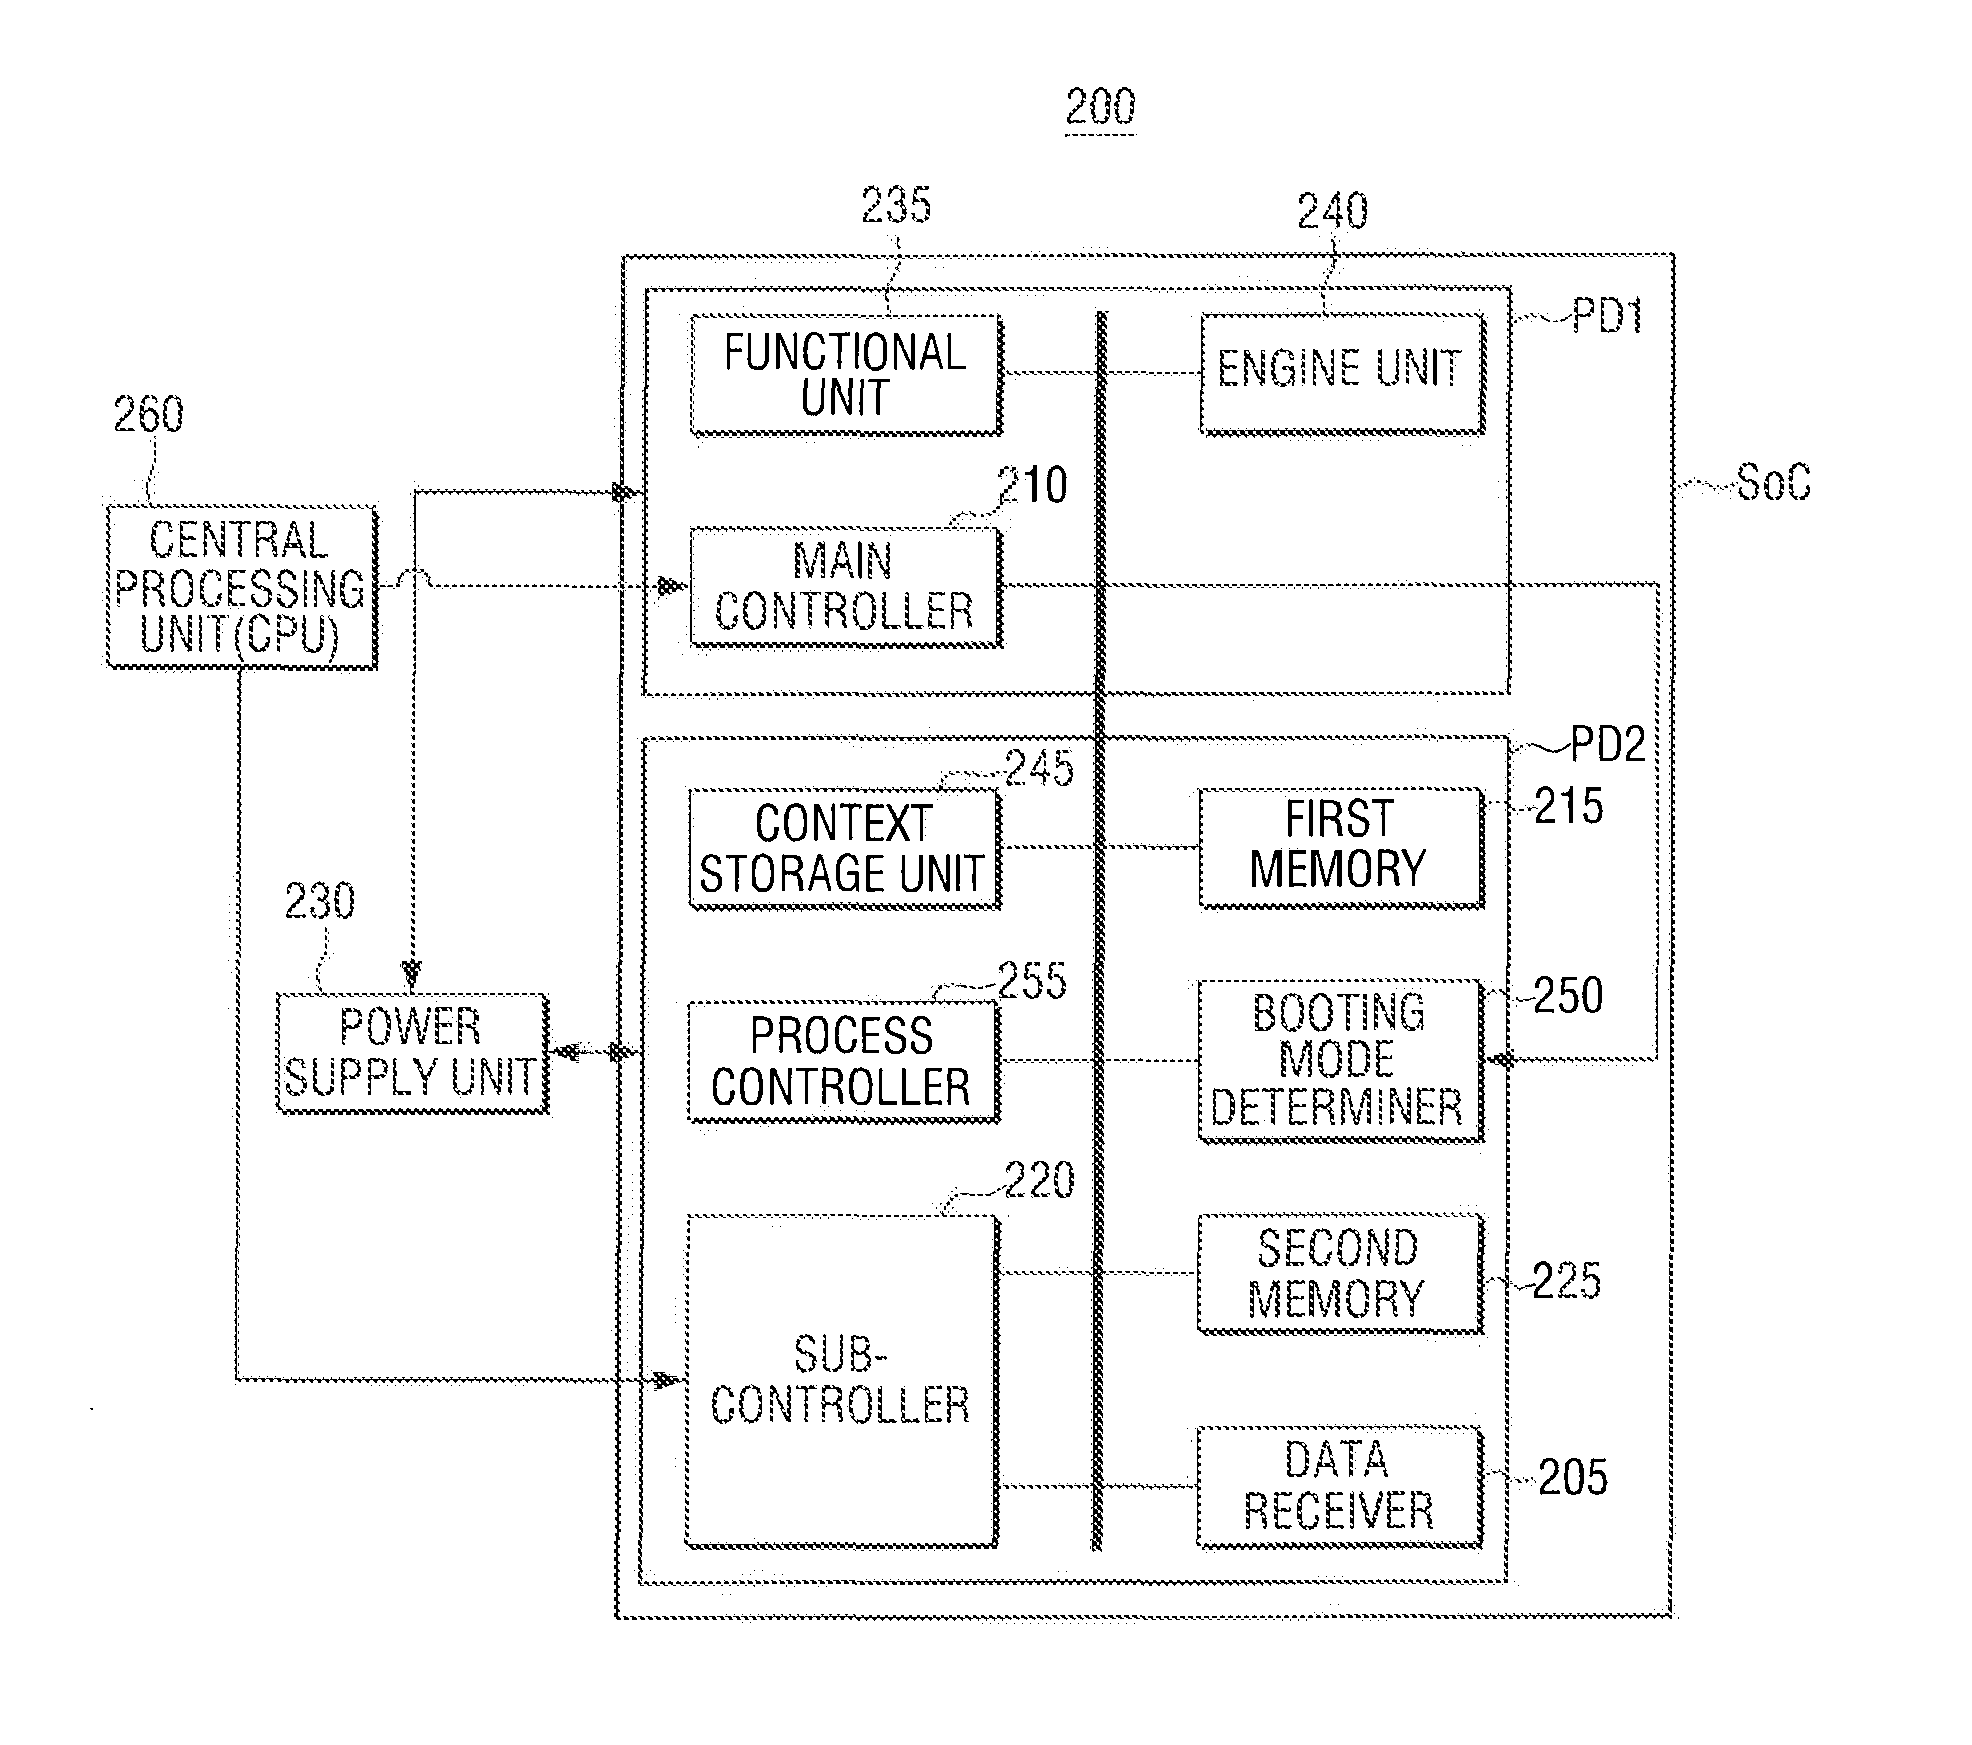 Image forming apparatus, system-on-chip (SoC) unit, and driving method thereof